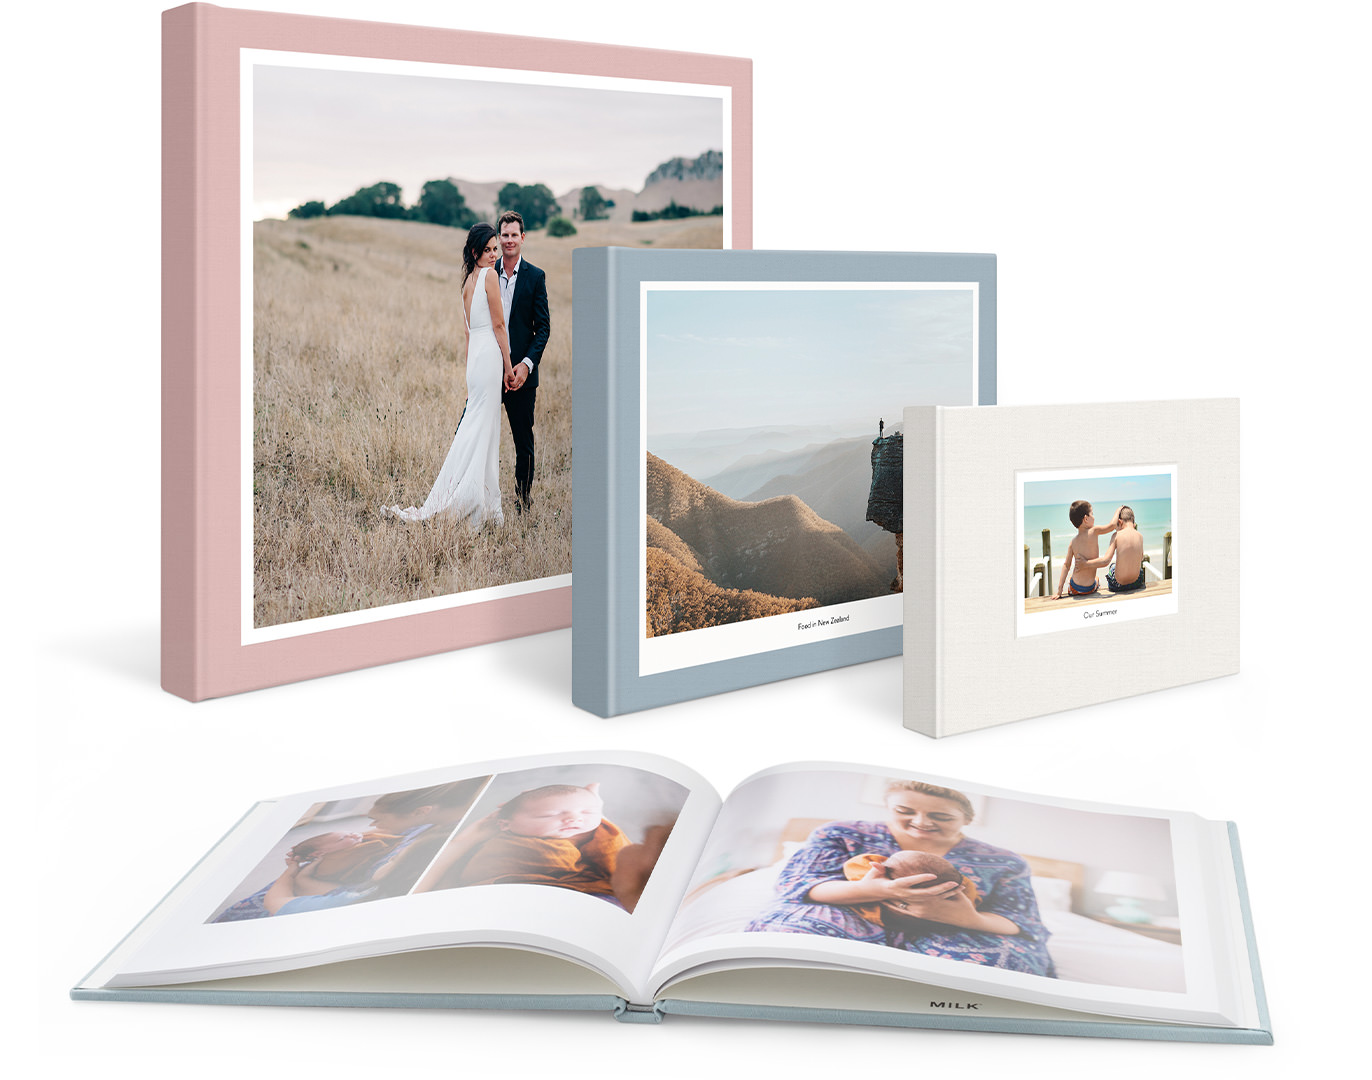 Four Classic Photo Books, one wedding book, one travel book, one family book and one laying open to display baby photos.